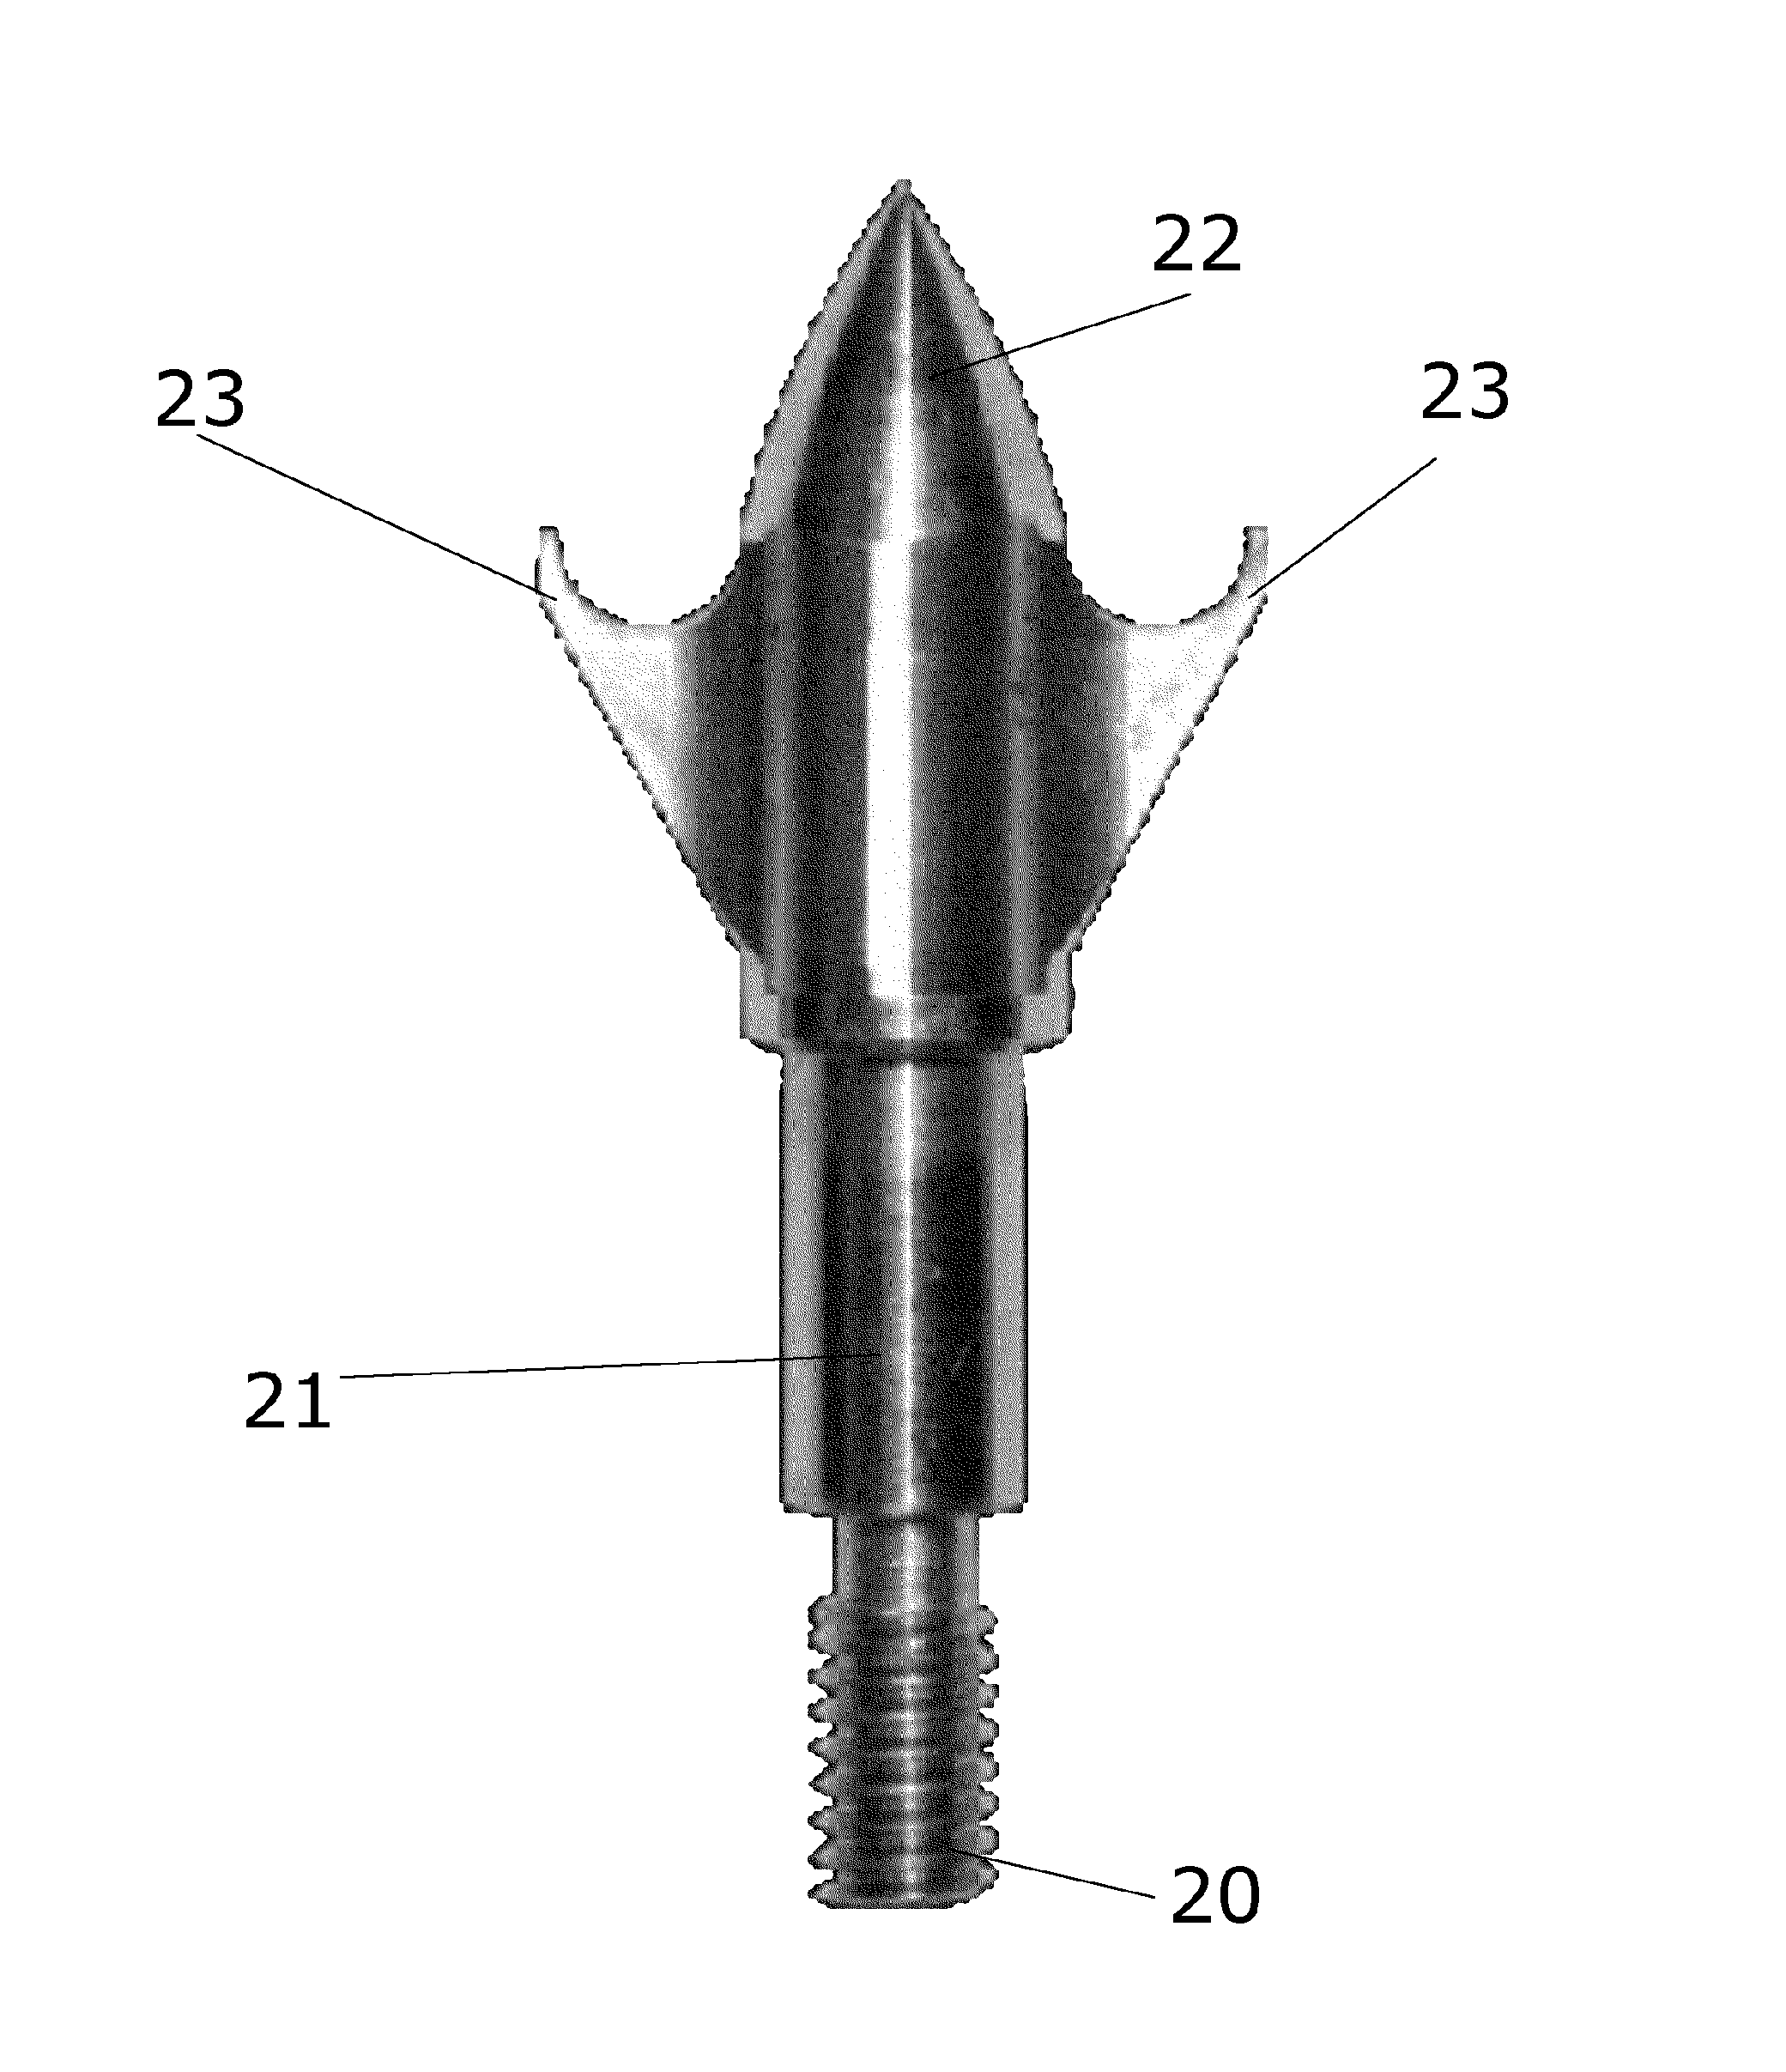 Hunting arrow tip and method of manufacture